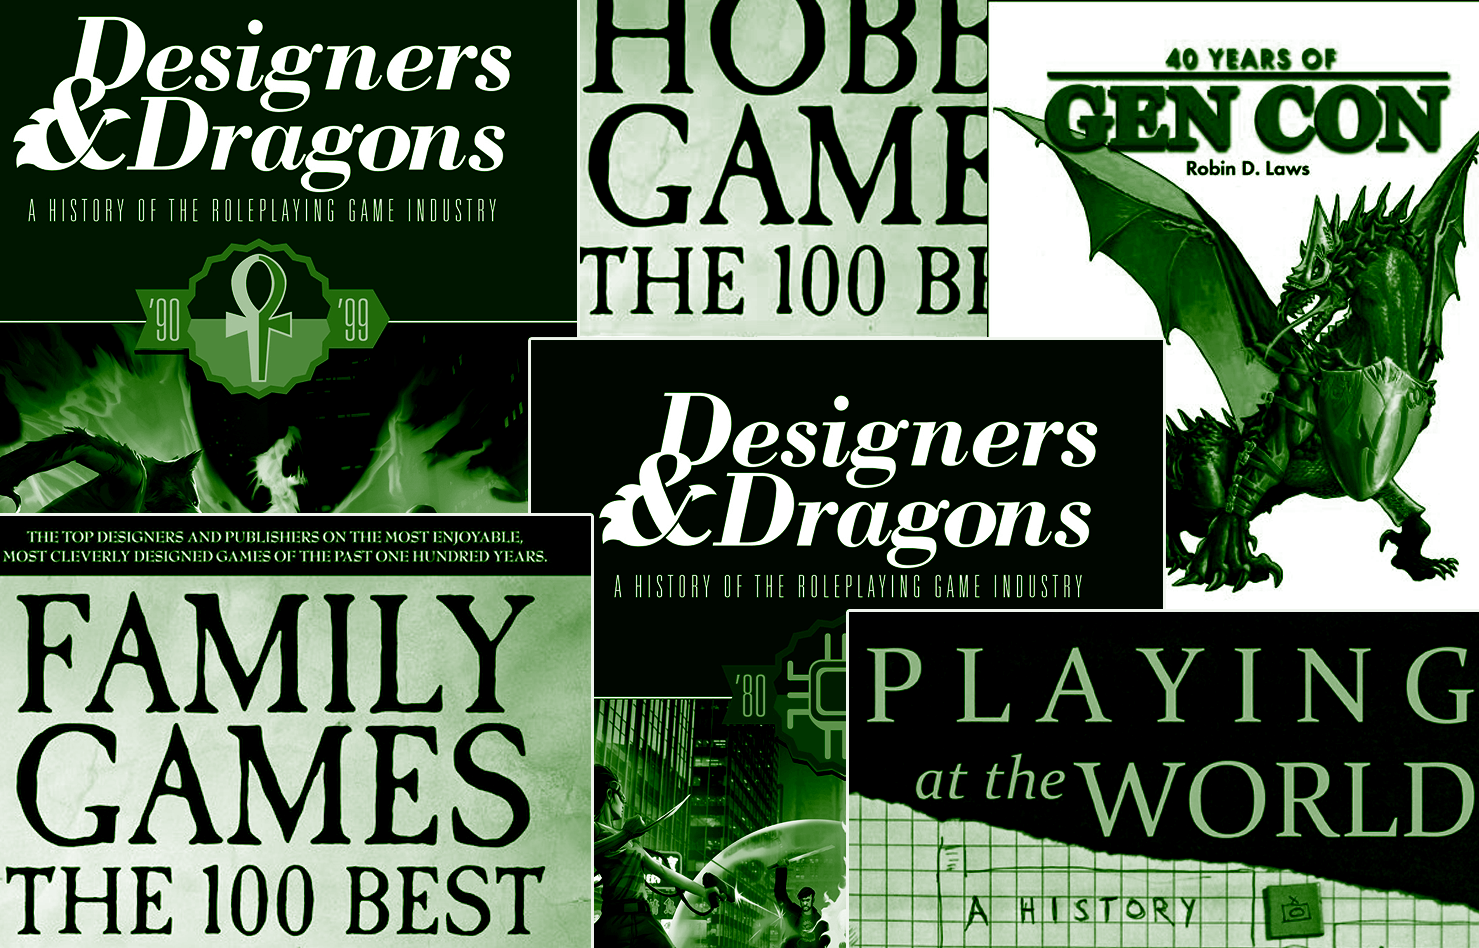 Designers, Dragons, and More gives you the history of tabletop roleplaying games